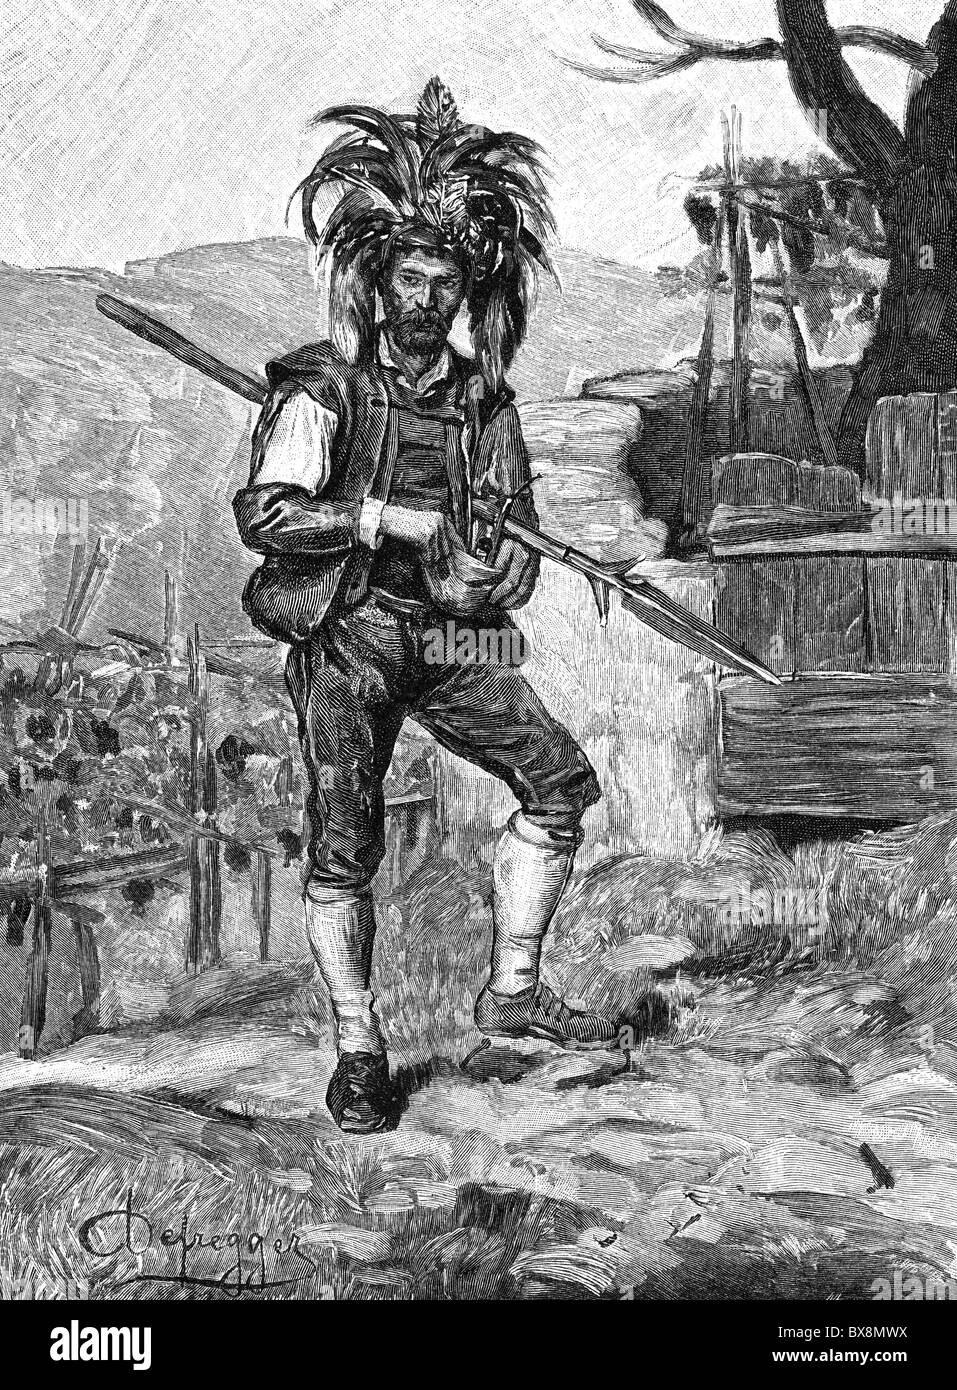 people, professions, saltner (keeper of the vineyard), near Meran, South Tyrol, wood engraving after drawing by Defregger, 19th century, costume, guard, weapon, partisan, Italy, Austria-Hungary, Austria, Cisleithania, Austro-Hungarian Empire, Austro - Hungarian, historic, historical, Alps, Additional-Rights-Clearences-Not Available Stock Photo